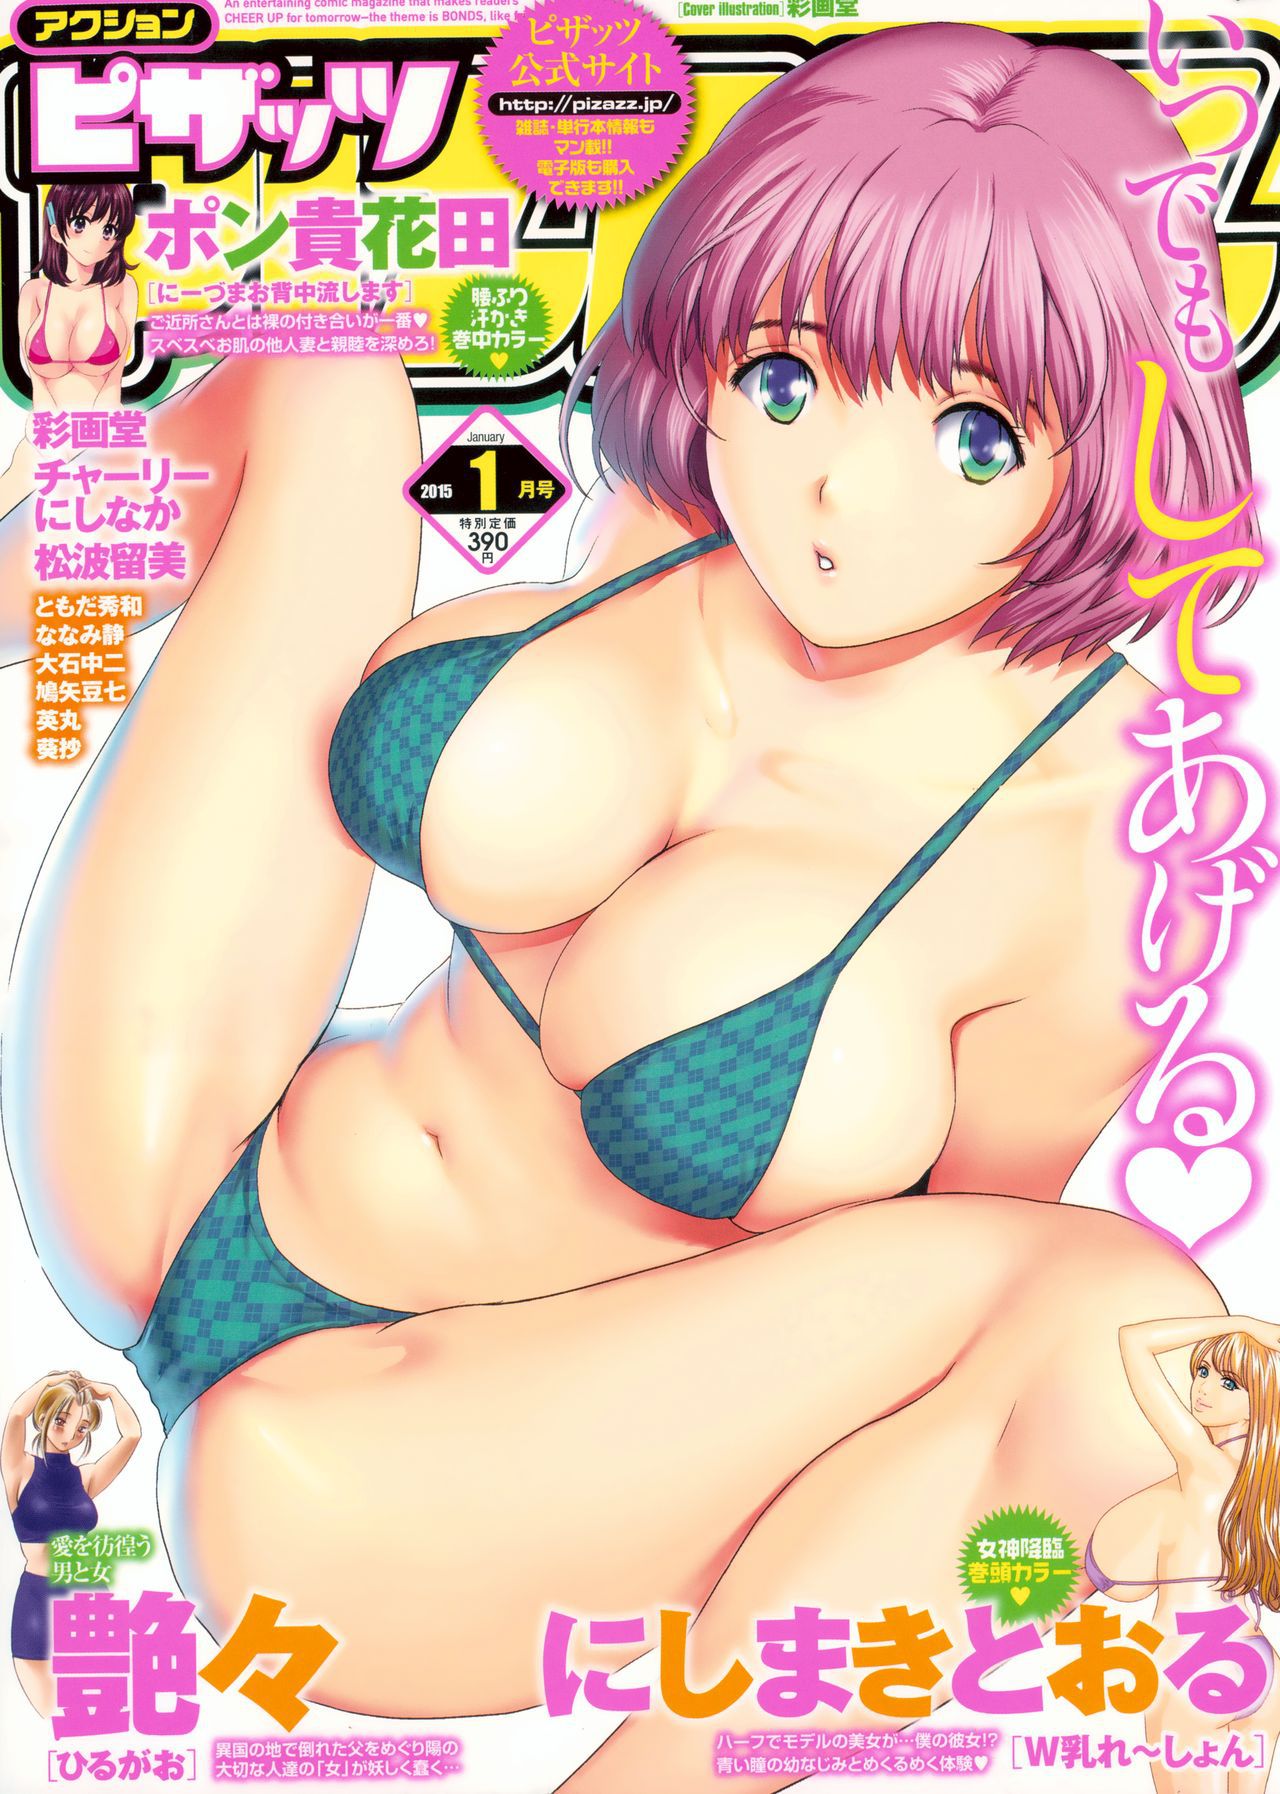 [Saigado] Cover Illustrations [彩画堂] Cover Illustrations 80